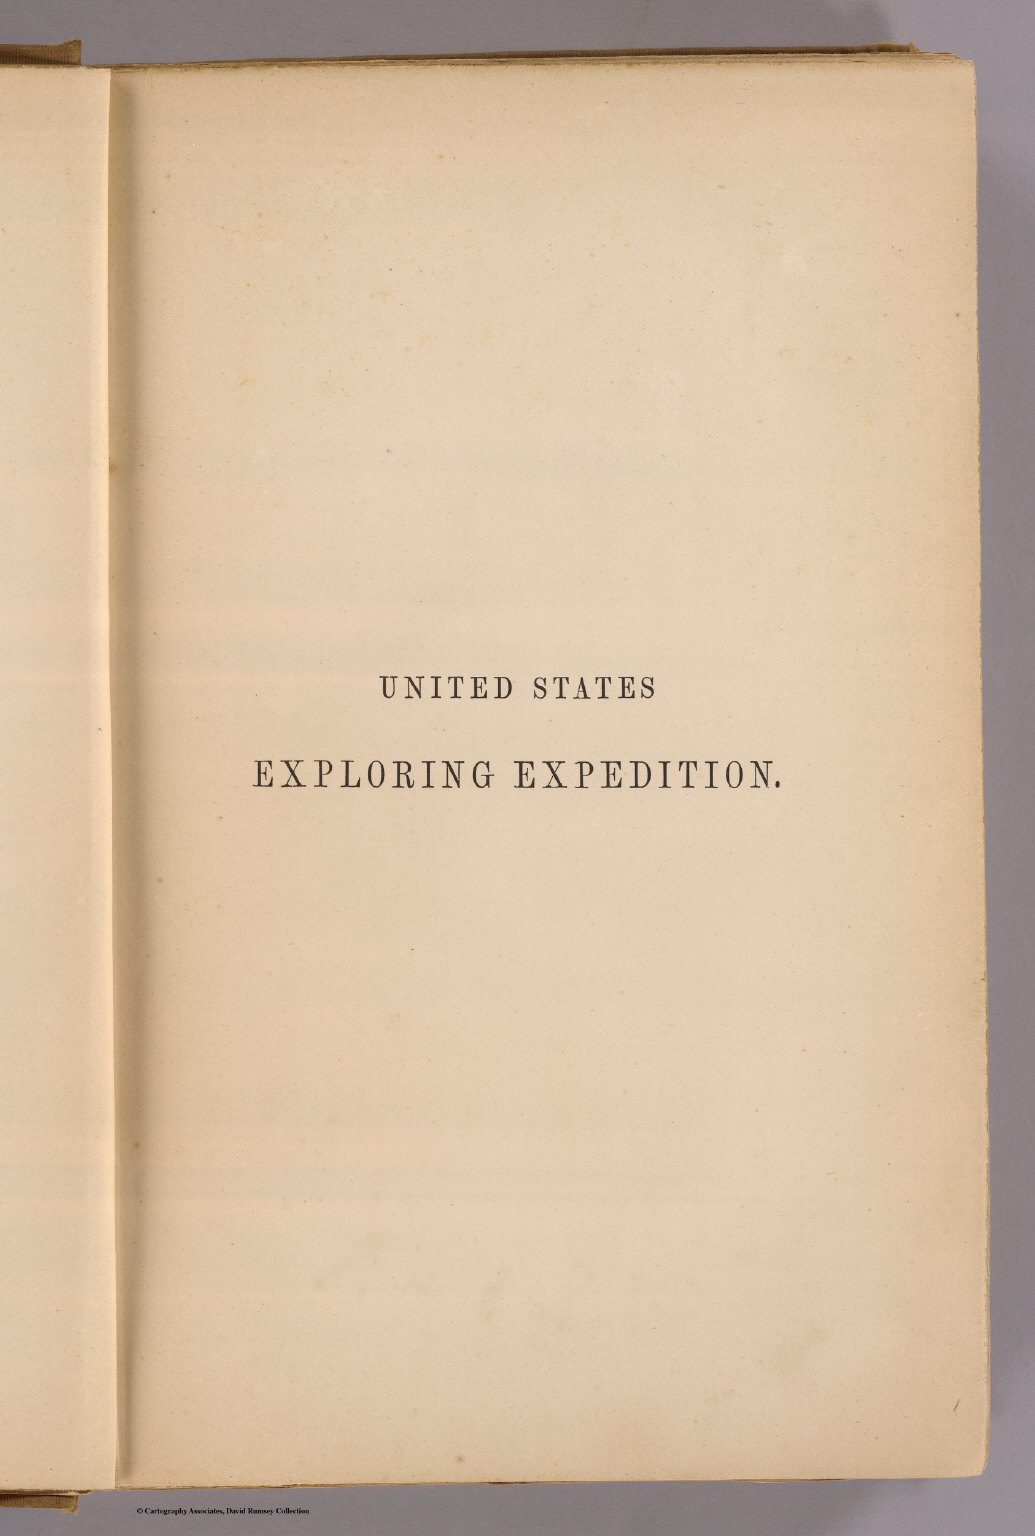 half-title-page-united-states-exploring-expedition-v-2-david